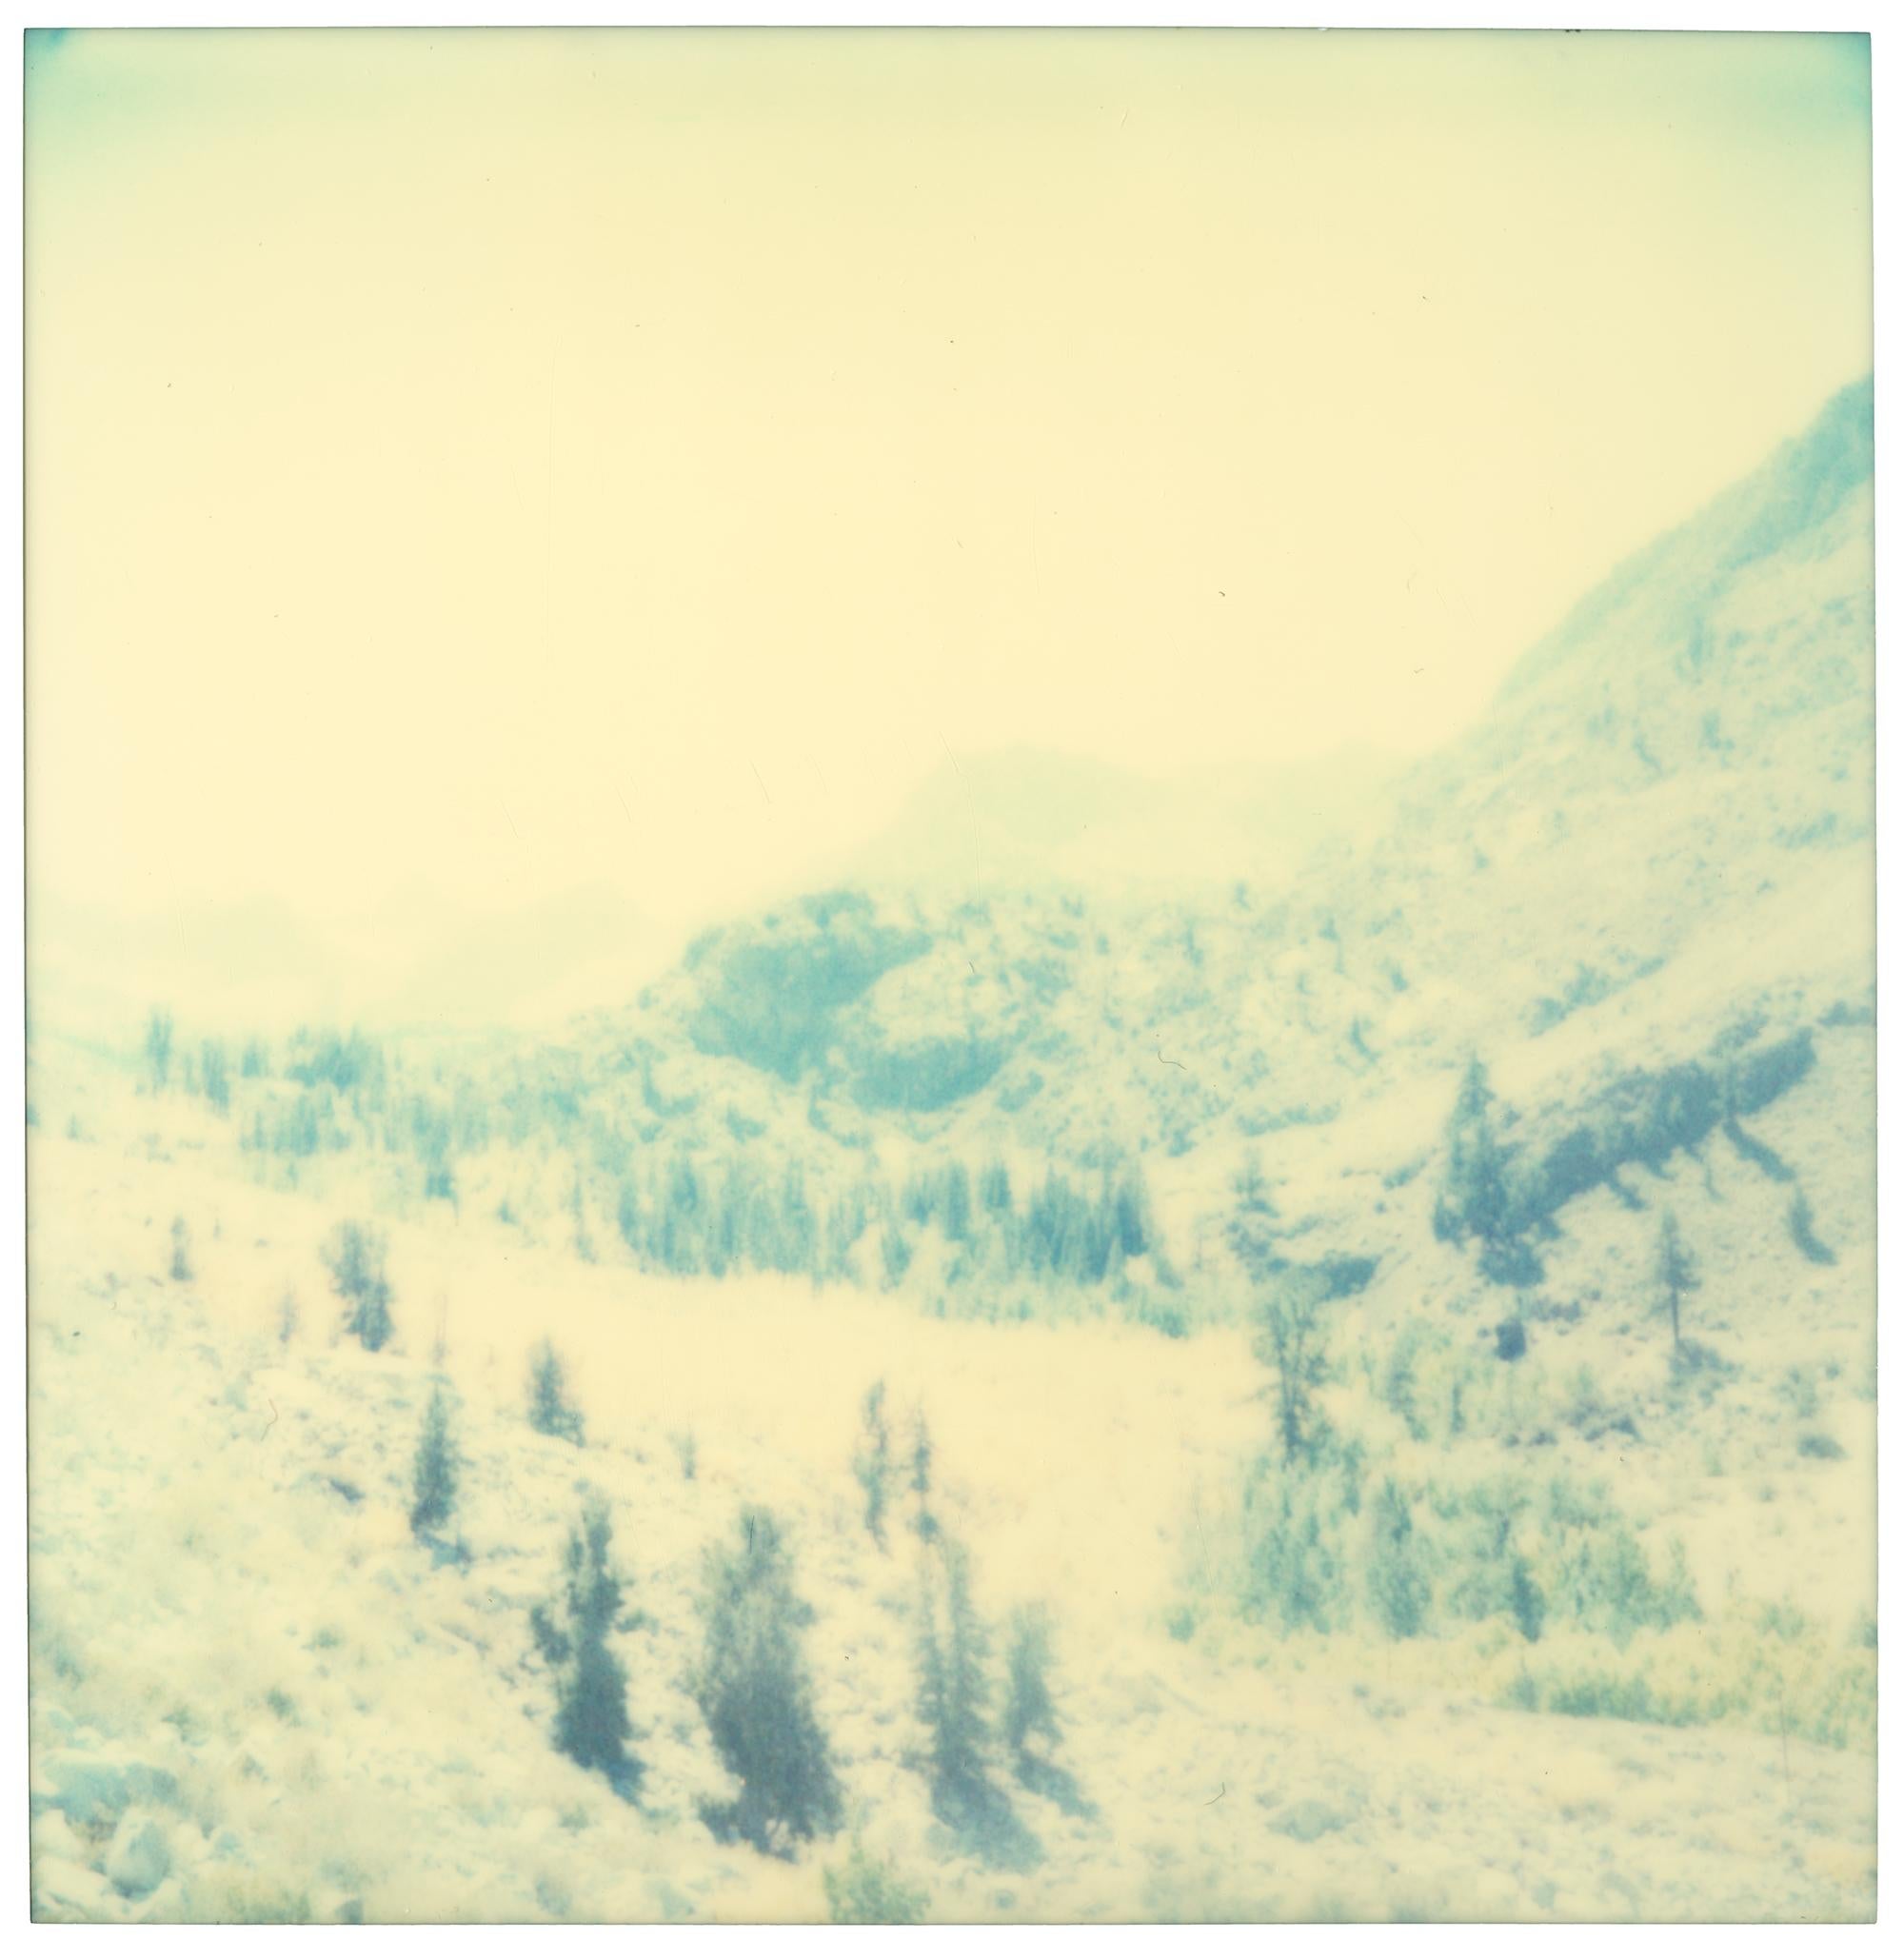 The Valley (Wastelands) - Polaroid, Contemporary, 21st Century, Color, Landscape